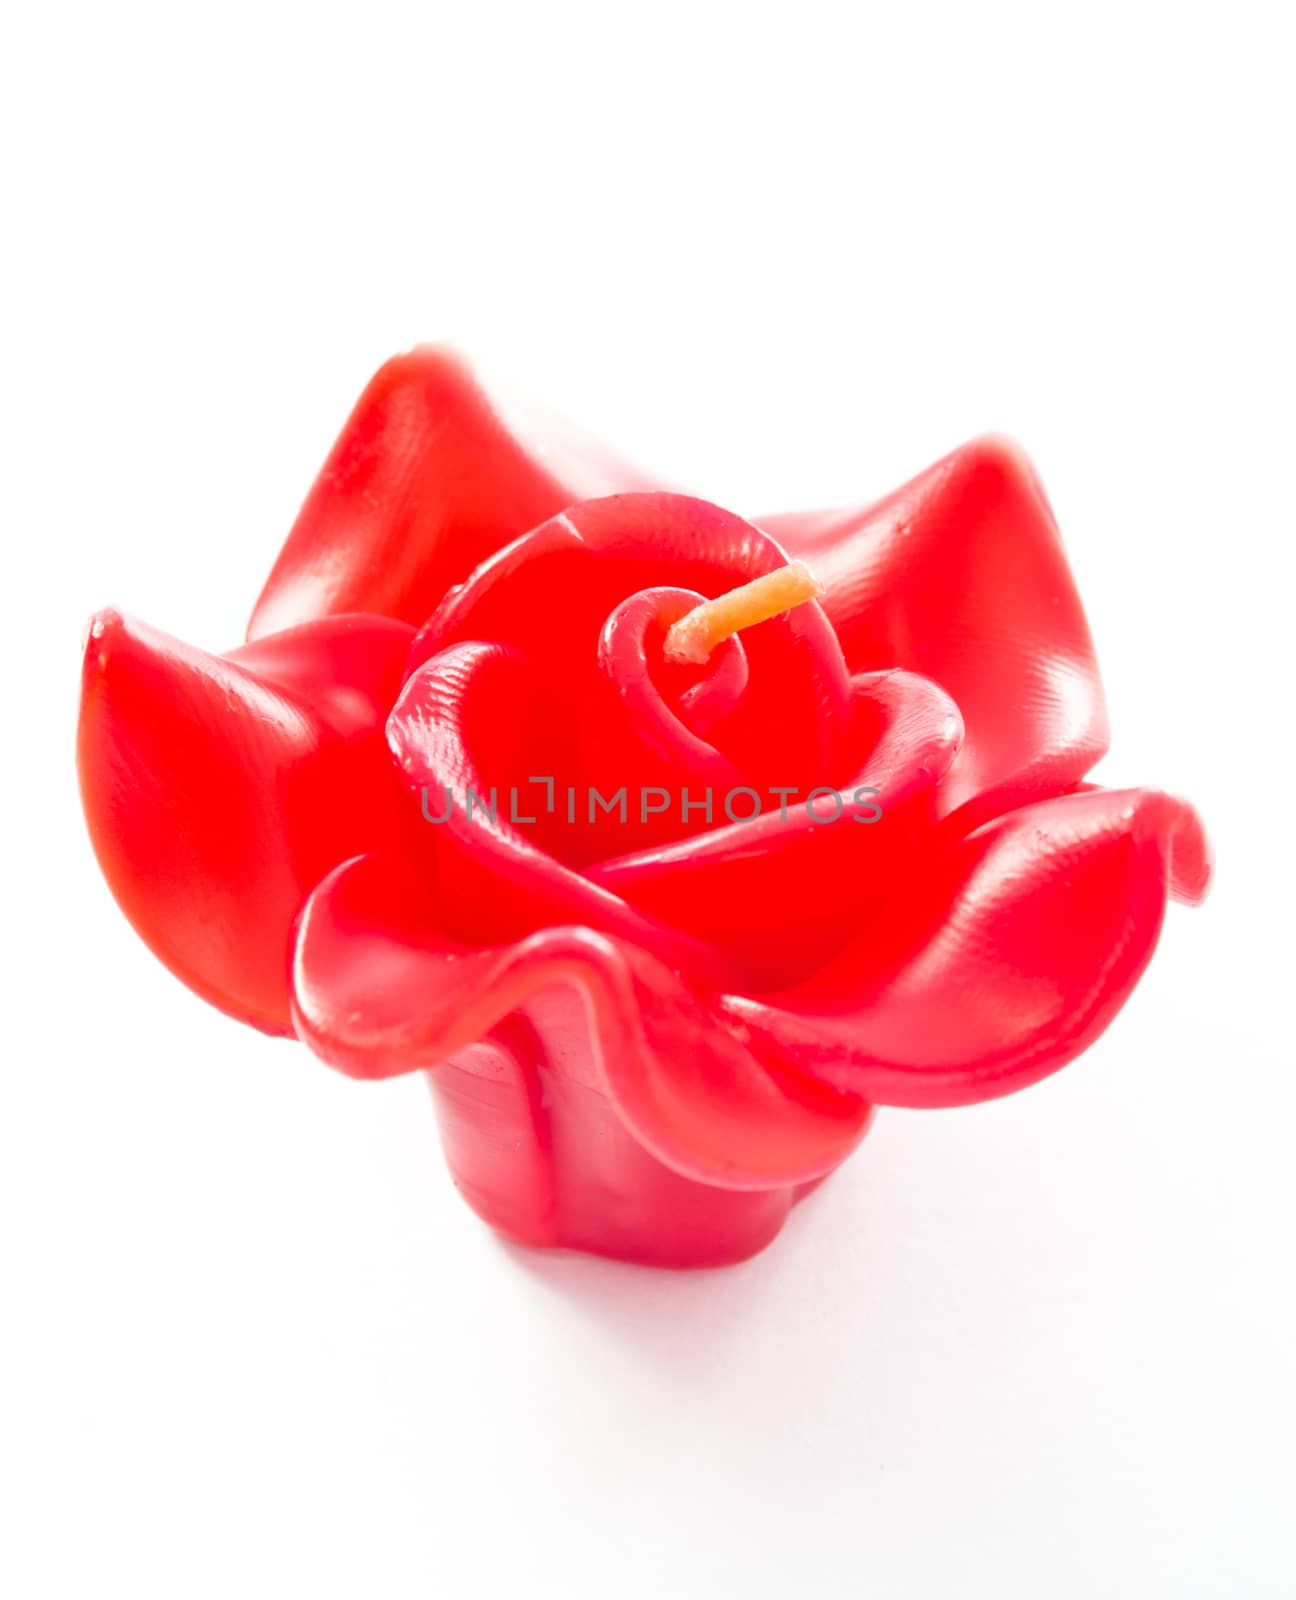 Red rose candle isolated on white background by tisskananat